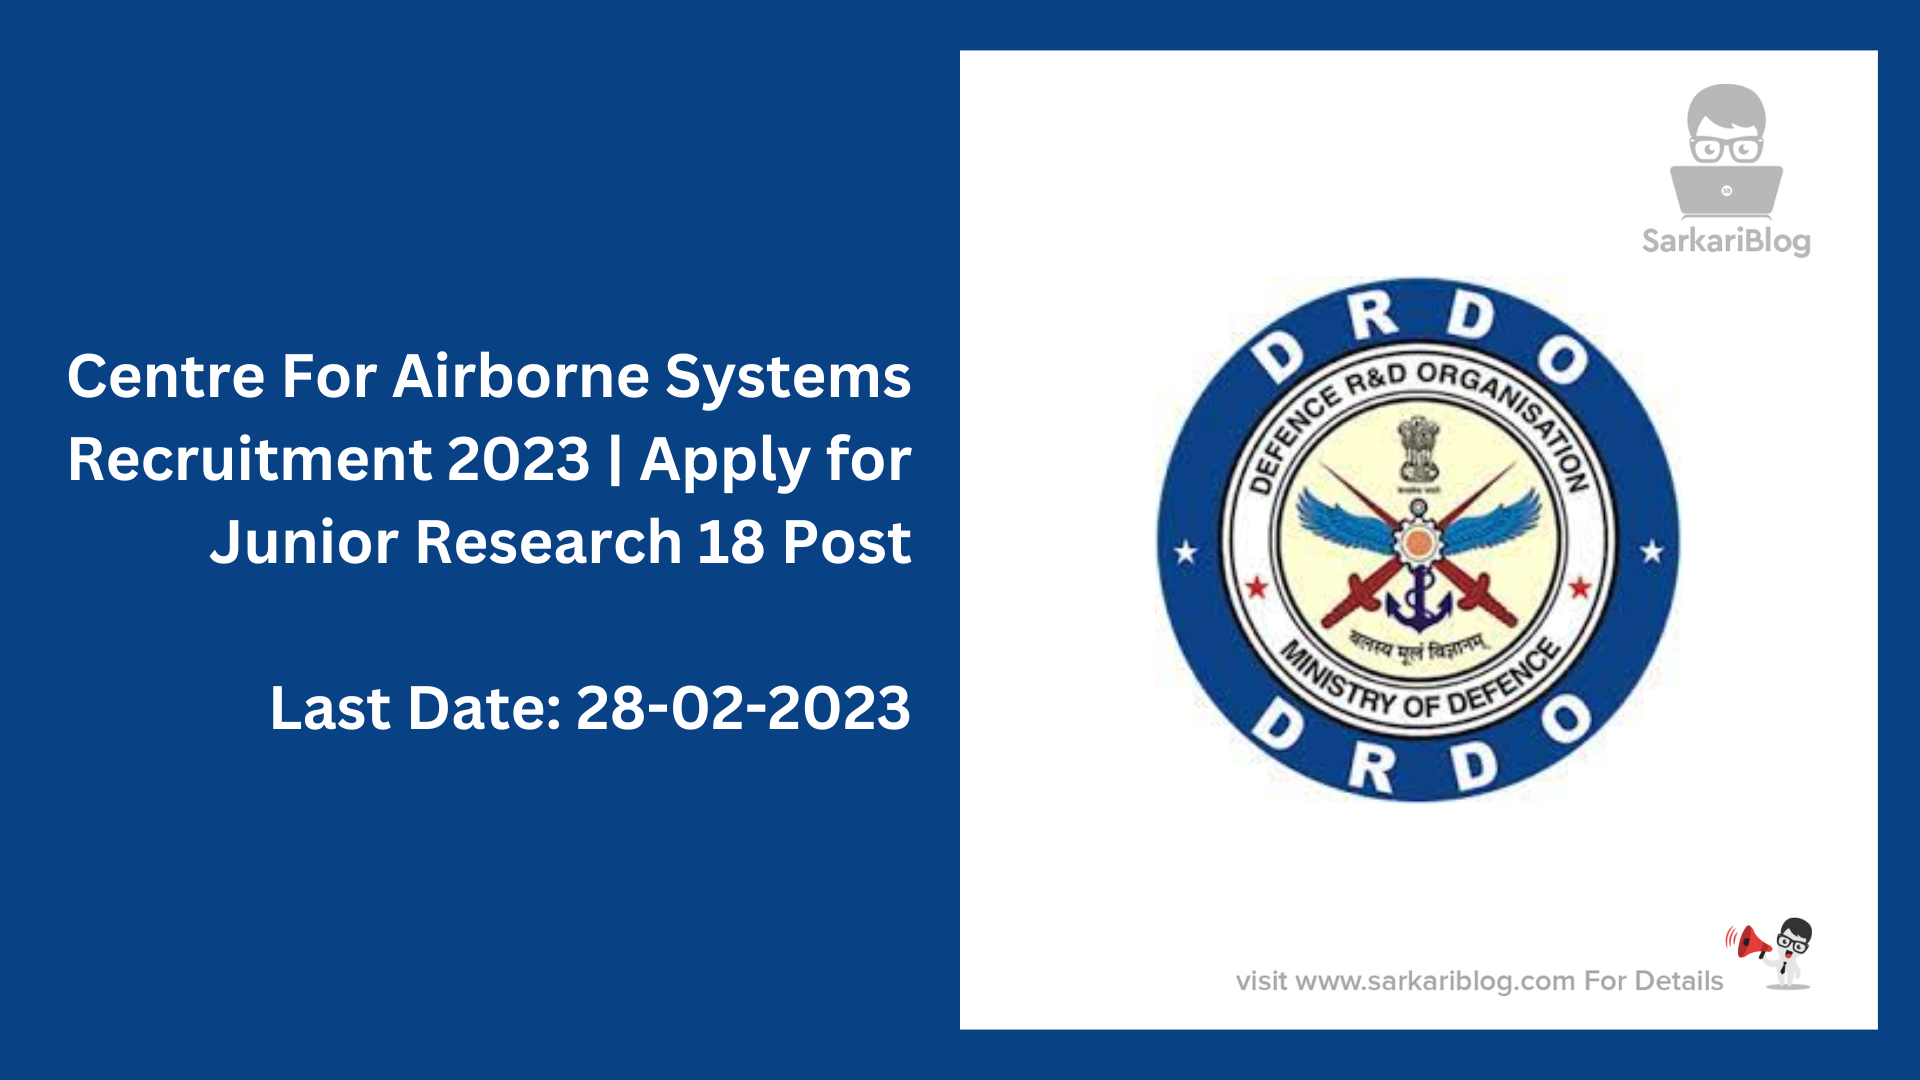 Centre For Airborne Systems Recruitment 2023